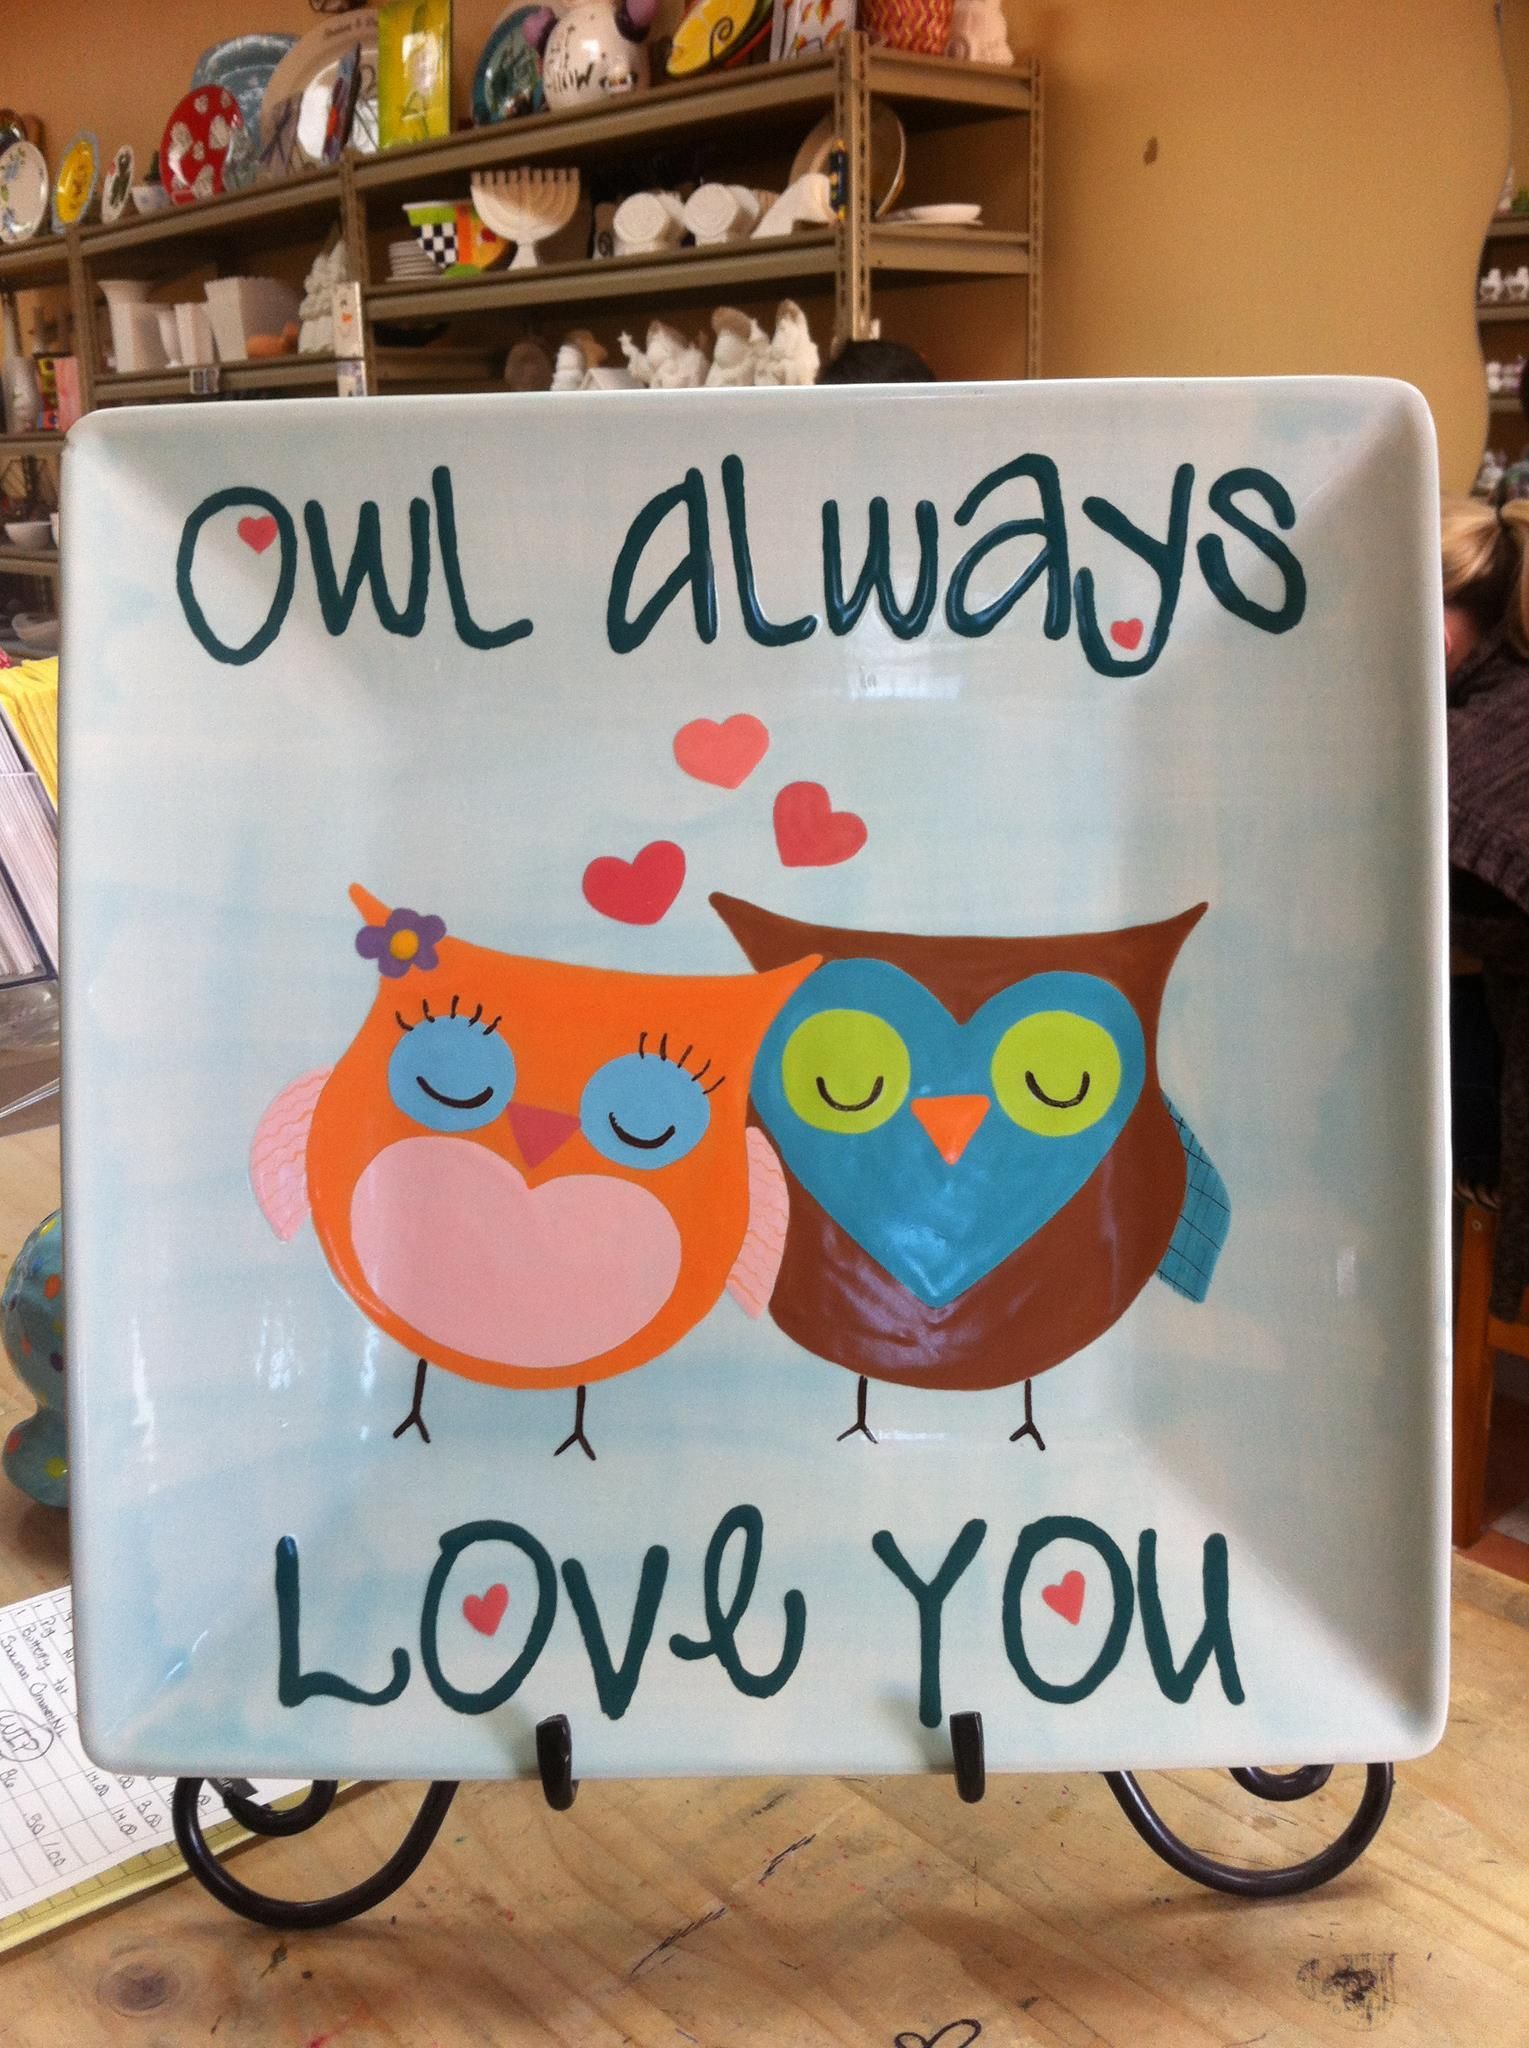 Owl Painted Platter. Not necessary a plate, but I love owls and this saying! May